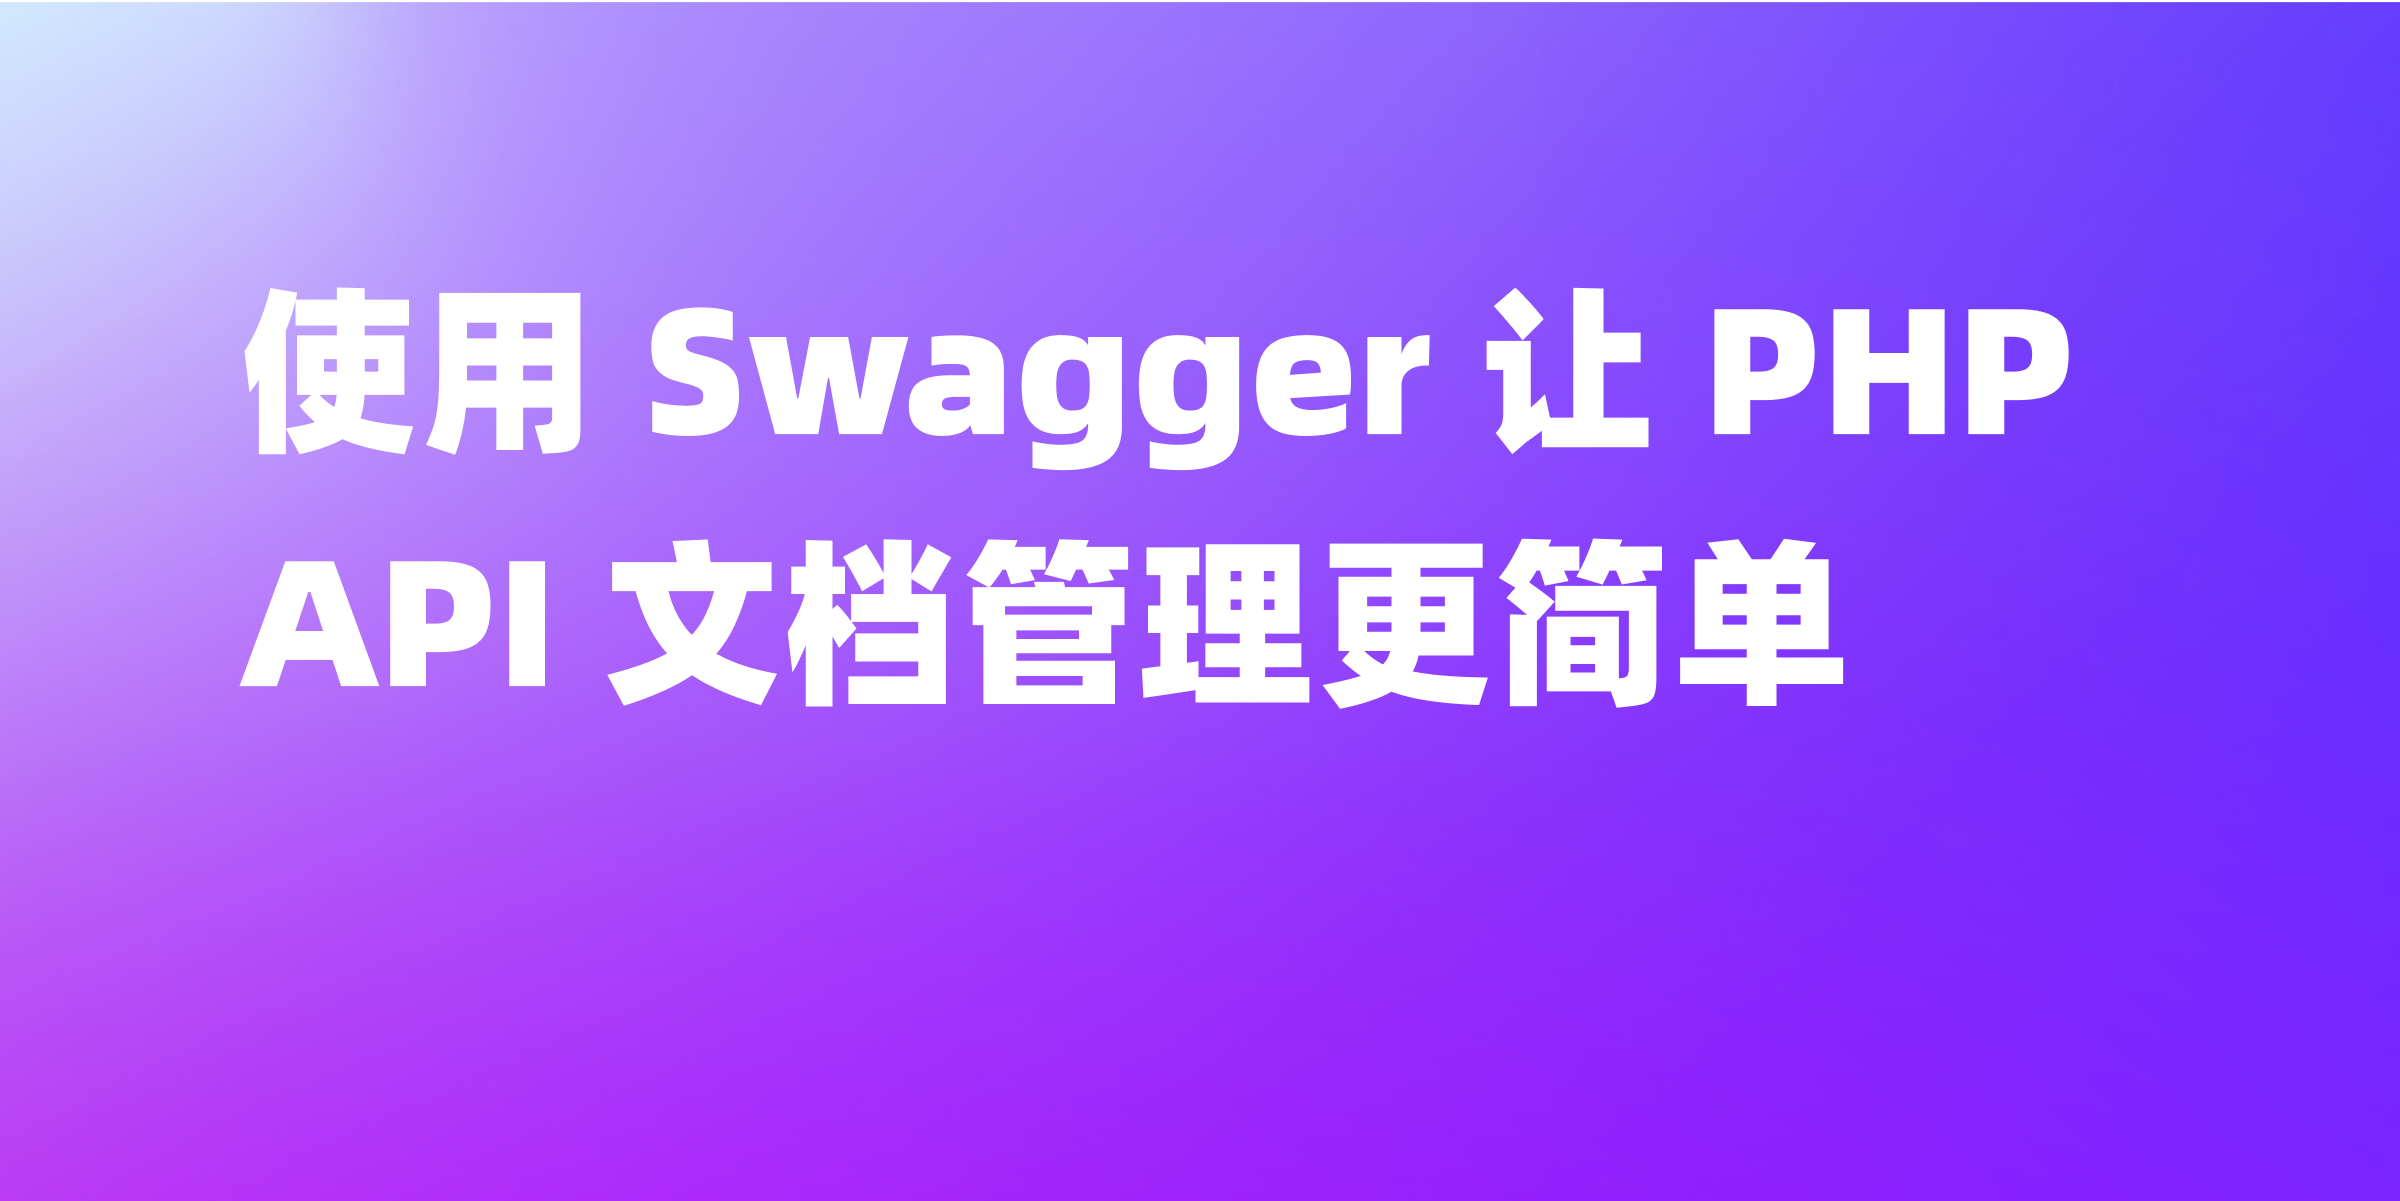 PHP Swagger：PHP 中使用 Swagger 的简易指南